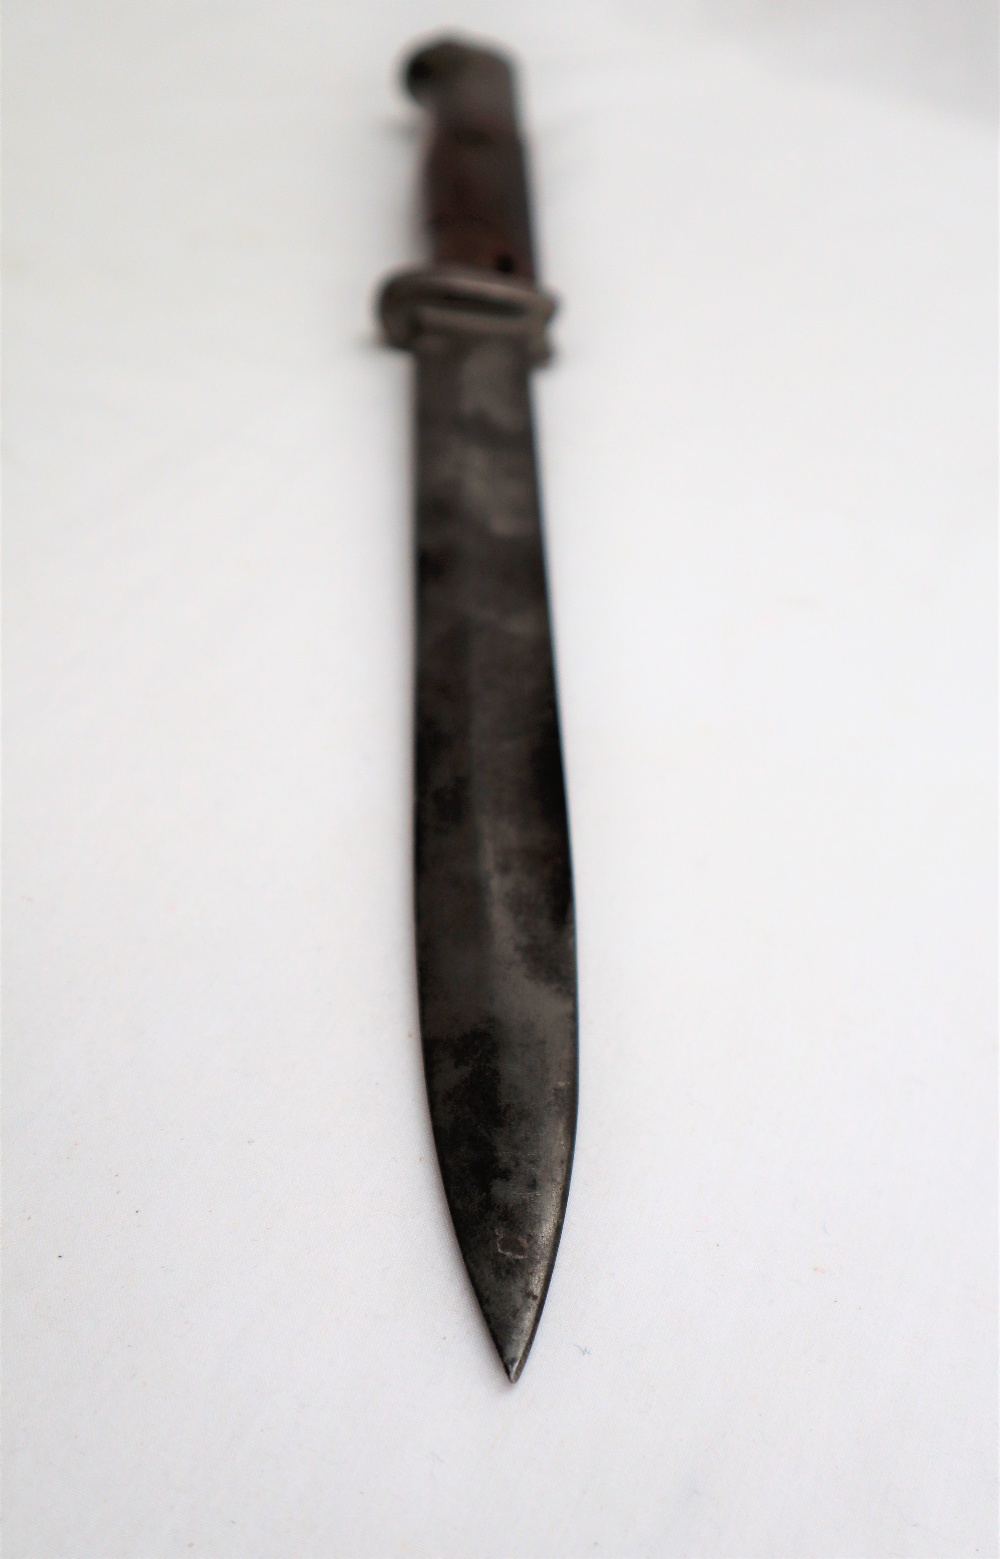 A German 84/98 pattern bayonet, with a fullered blade, stamped E. - Image 2 of 5